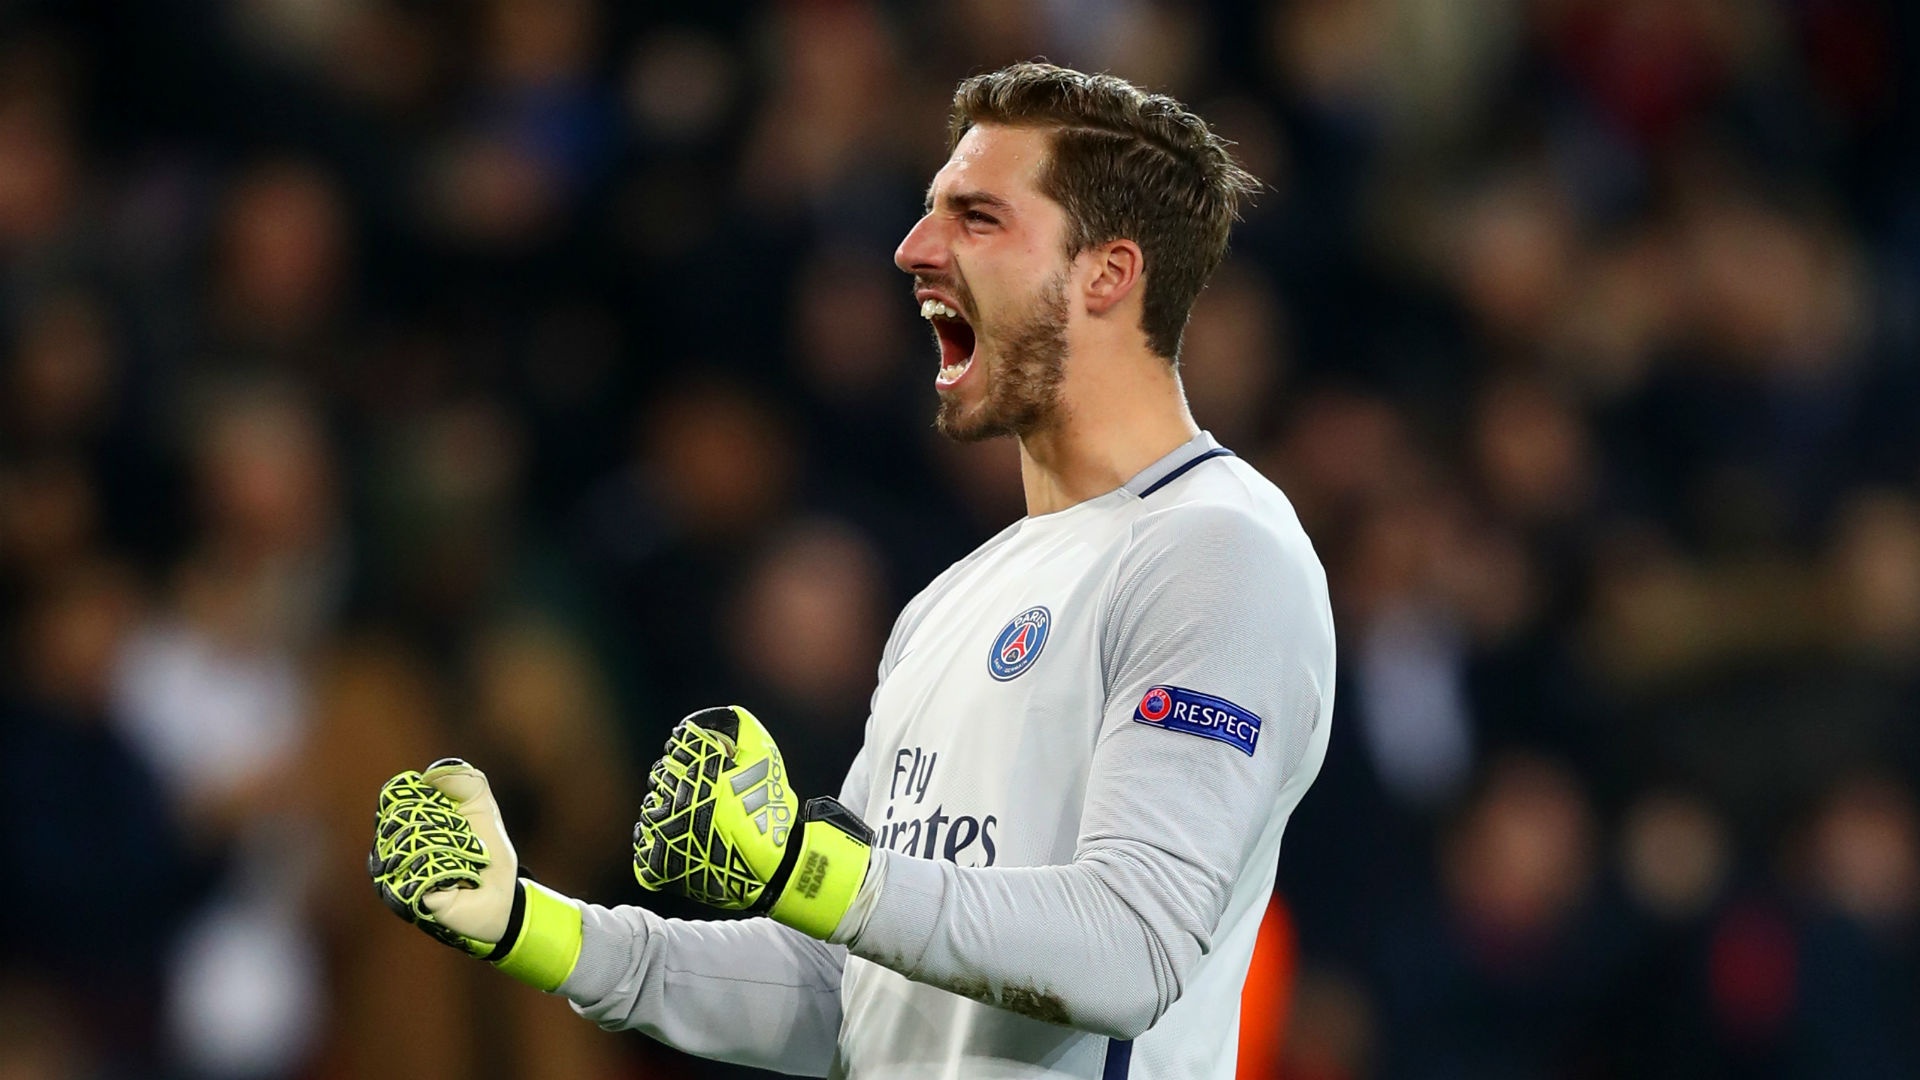 Trapp shutout at Angers pleases PSG boss Emery